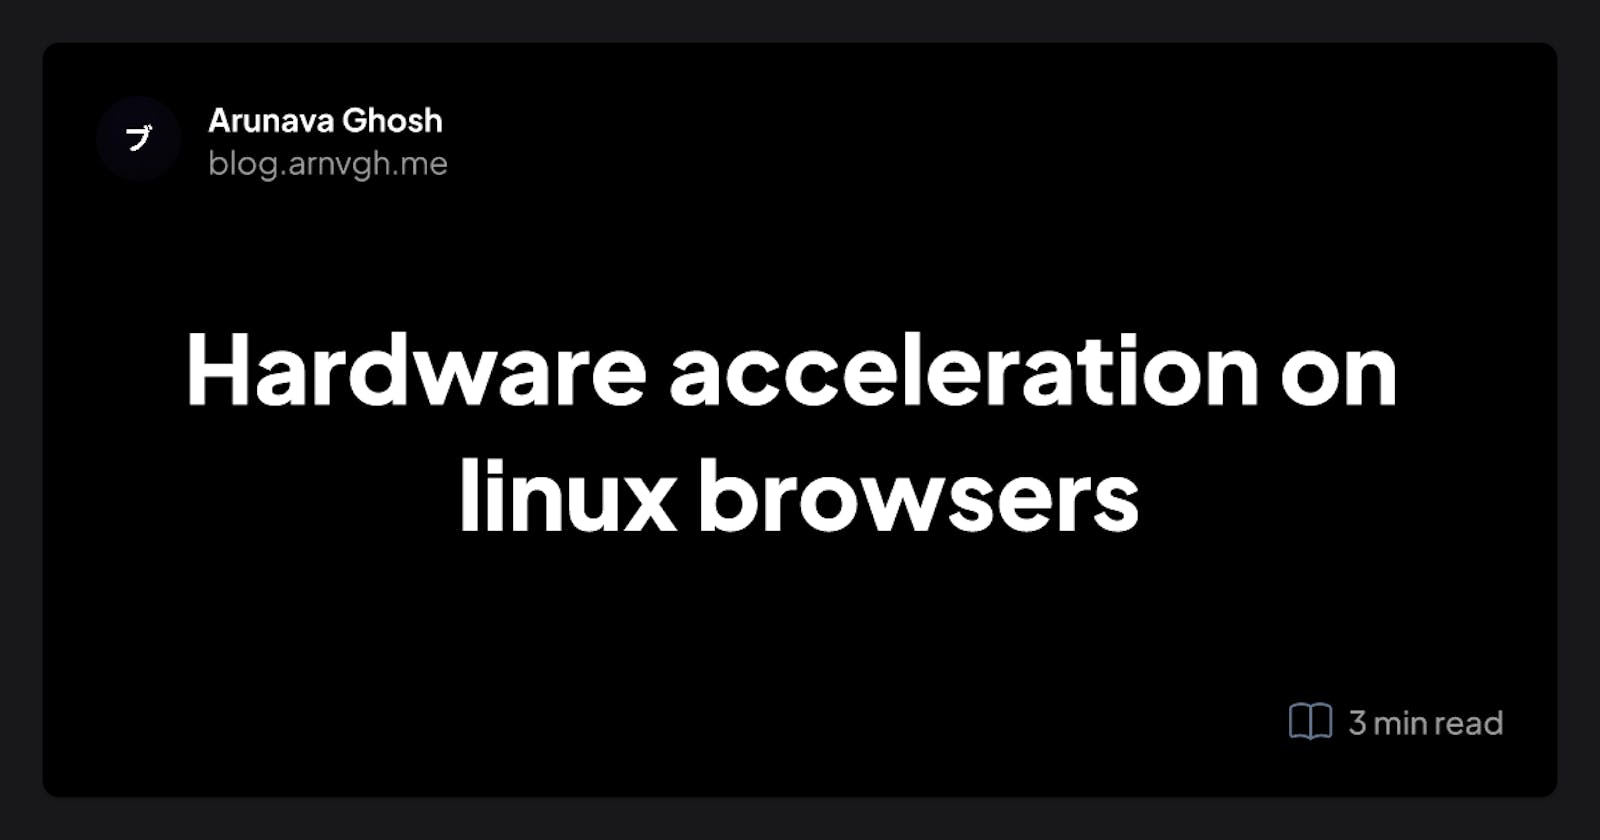 Hardware acceleration on linux browsers